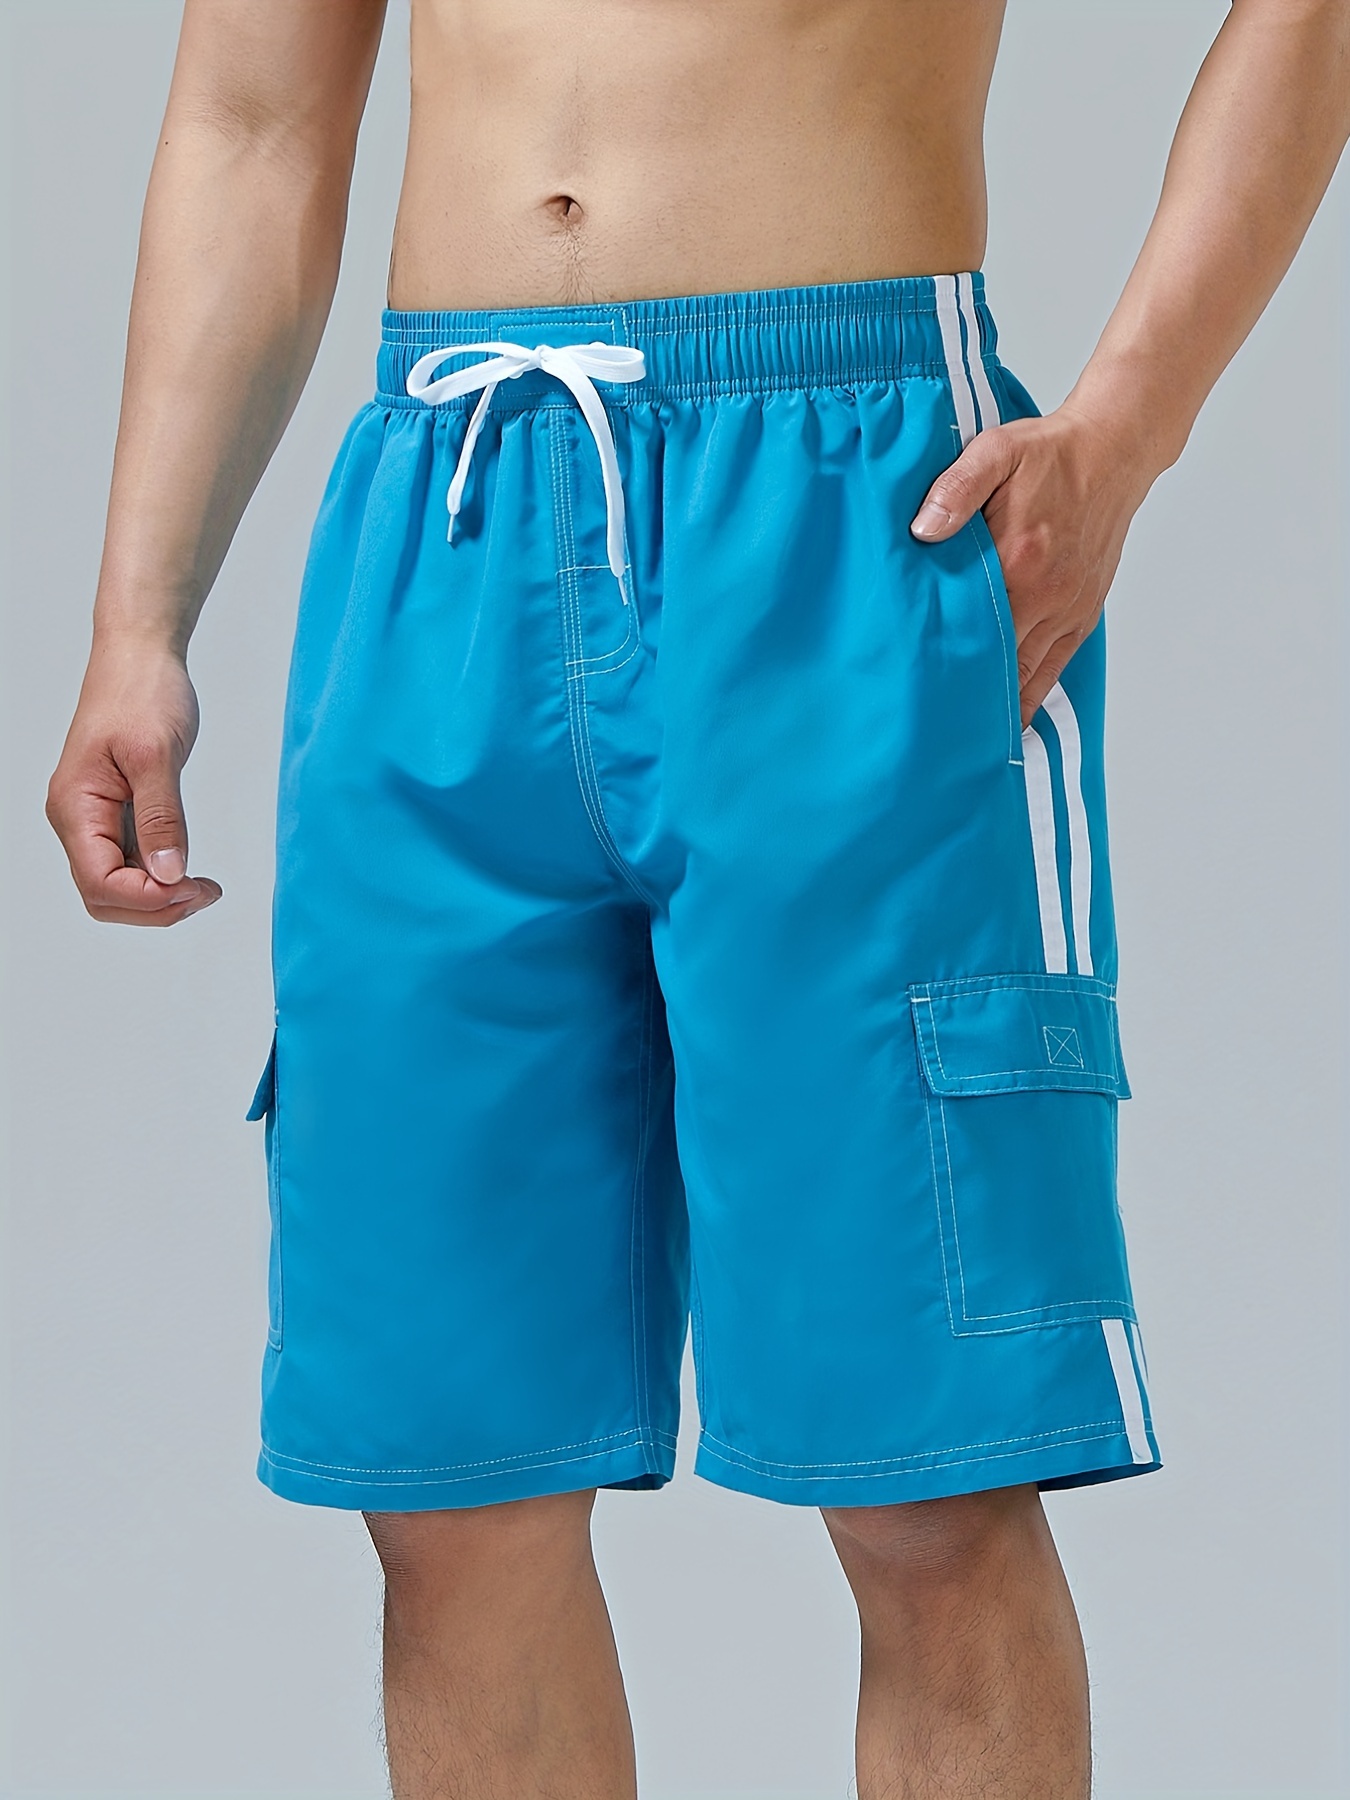 TOWED22 Swimsuit Men,Men's Swim Trunks Quick Dry Wave Pattern with Mesh  Lining Board Shorts Light Blue,L